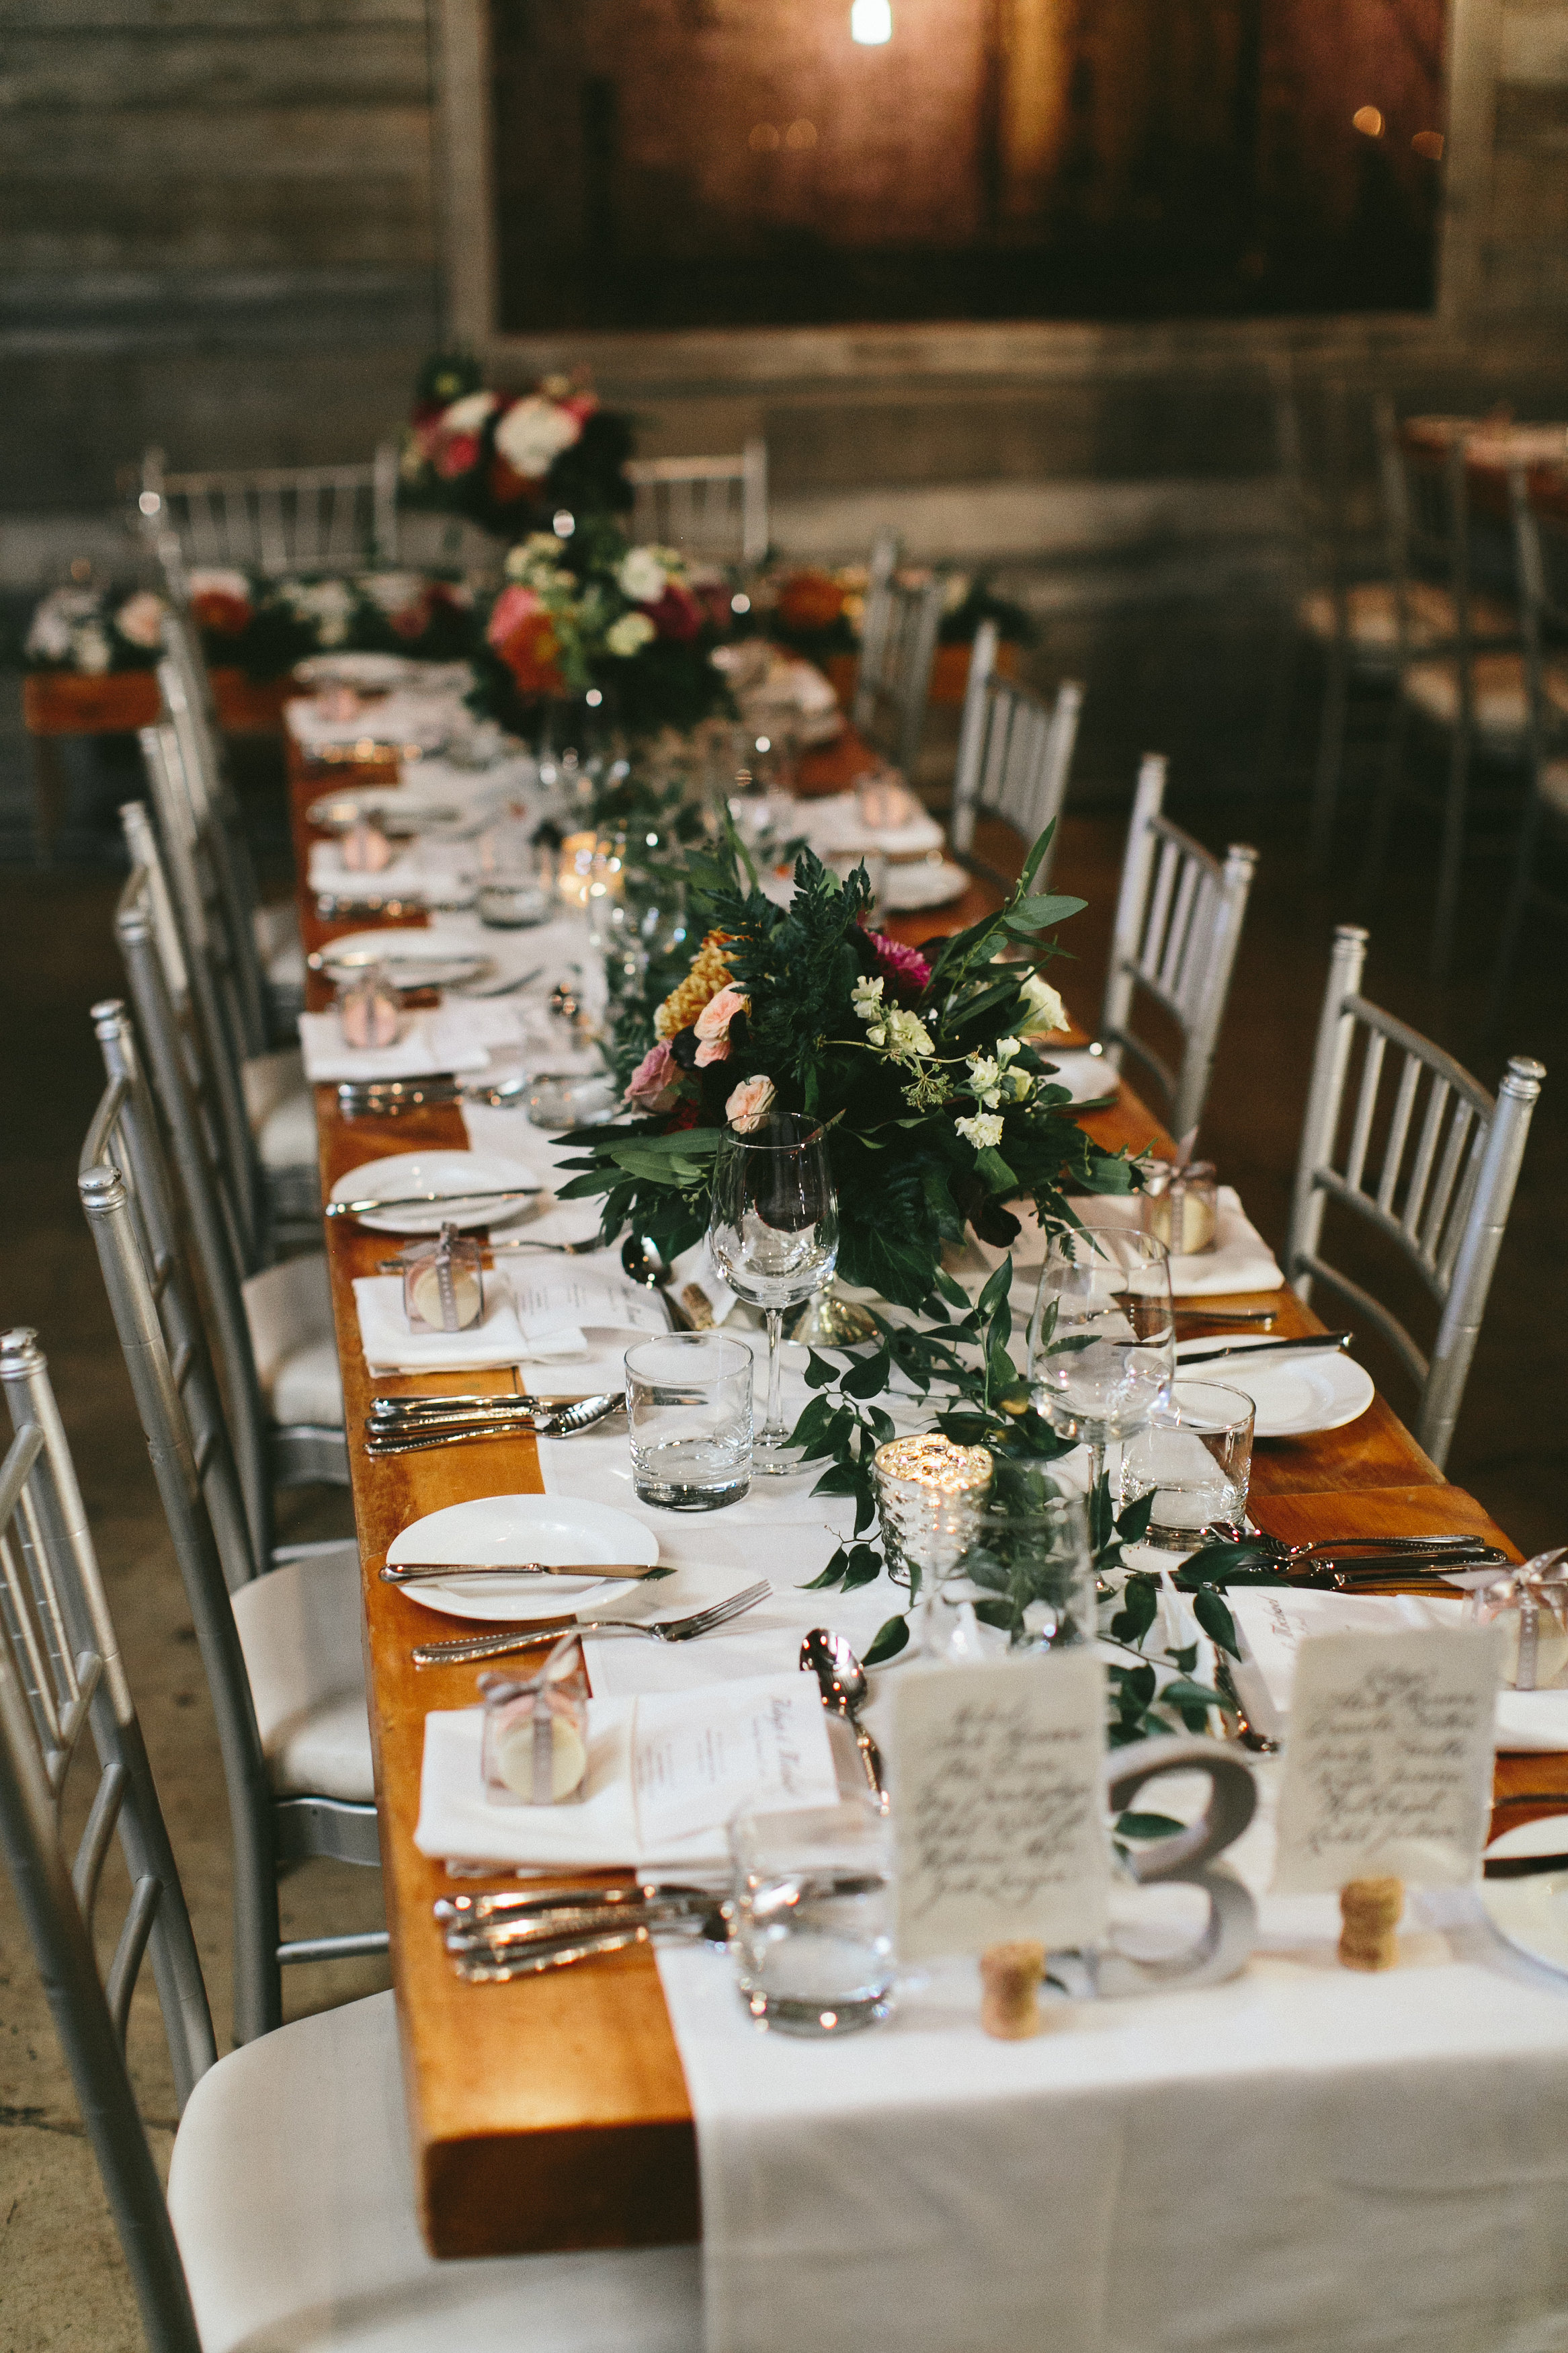 Elegant and Rustic Toronto Wedding in the Distillery District - Garland and centrepieces